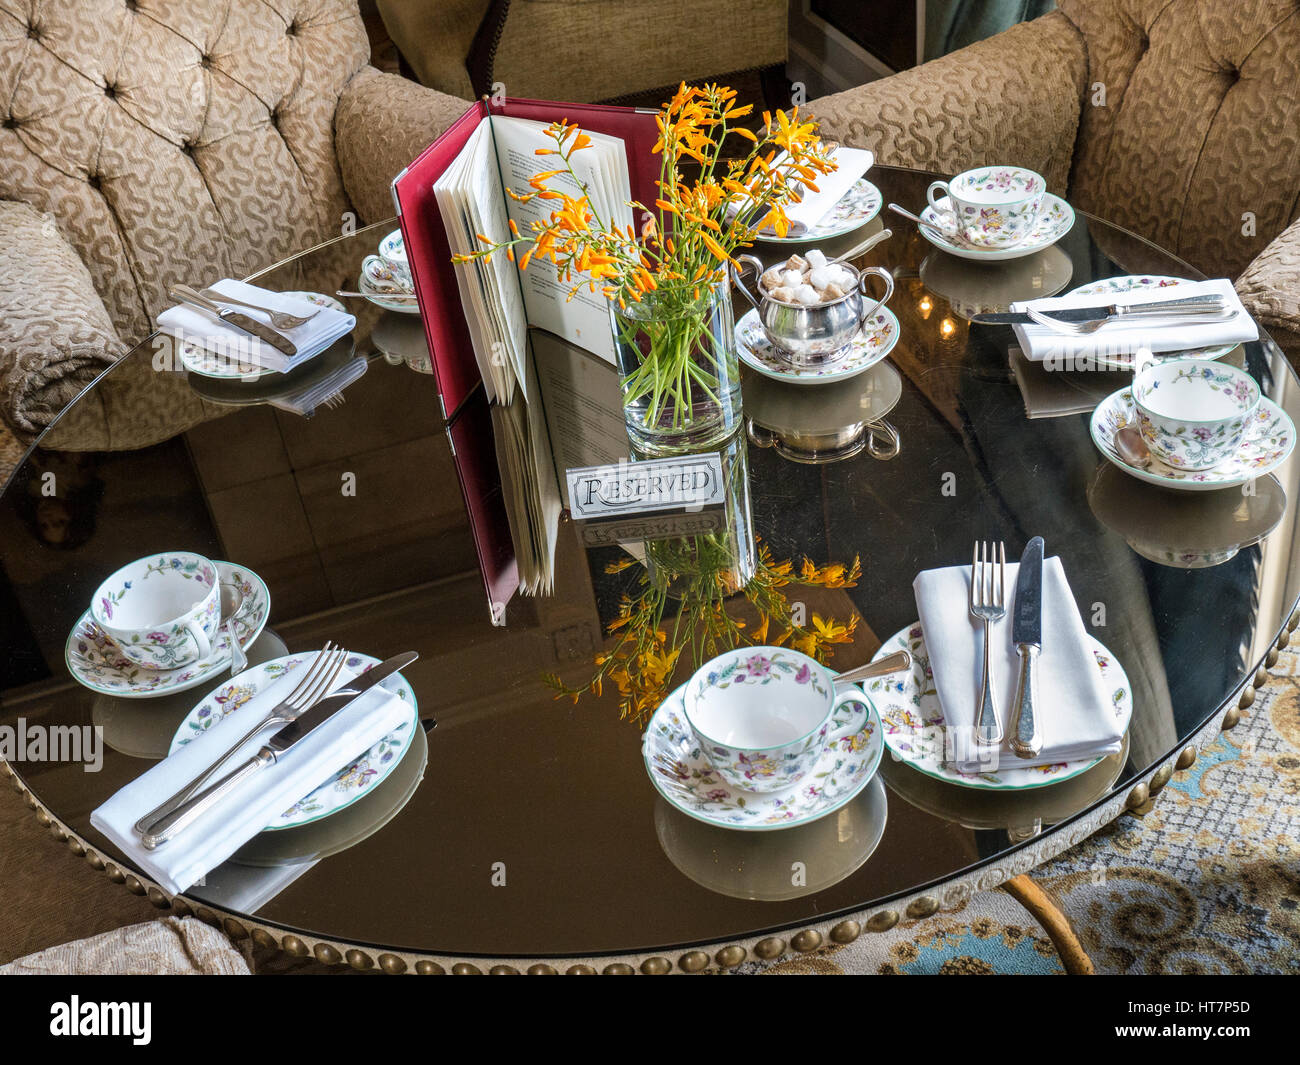 Relais & Chateaux Hotel restaurant table with reserved sign, laid for traditional English afternoon tea Stock Photo